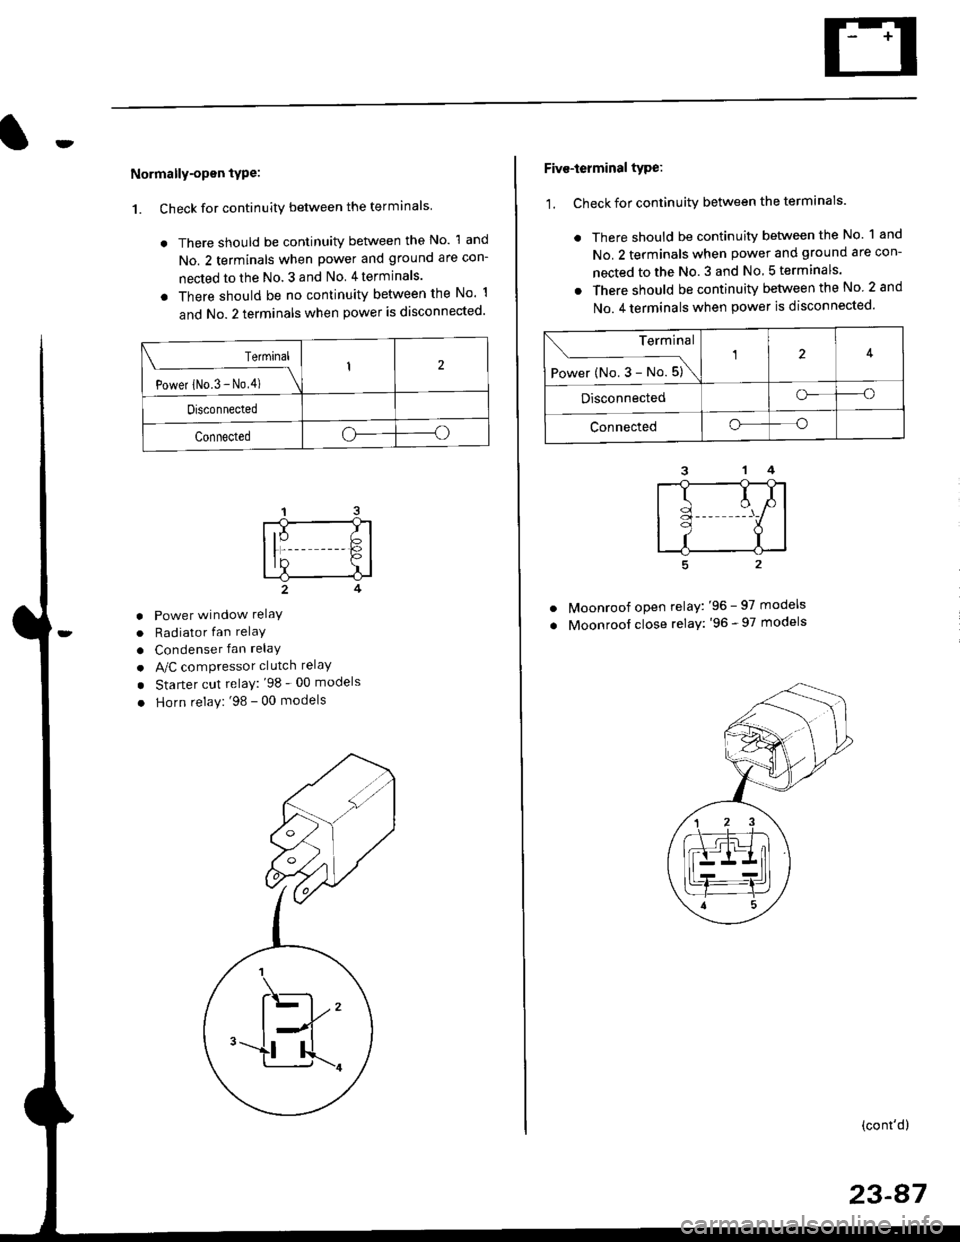 HONDA CIVIC 1996 6.G Owners Manual Normally-opsn tYPe:
1. Check for continuity between the terminals
. There should be continuity between the No. 1 and
No. 2 terminals when power and ground are con-
nected to the No. 3 and No 4terminal